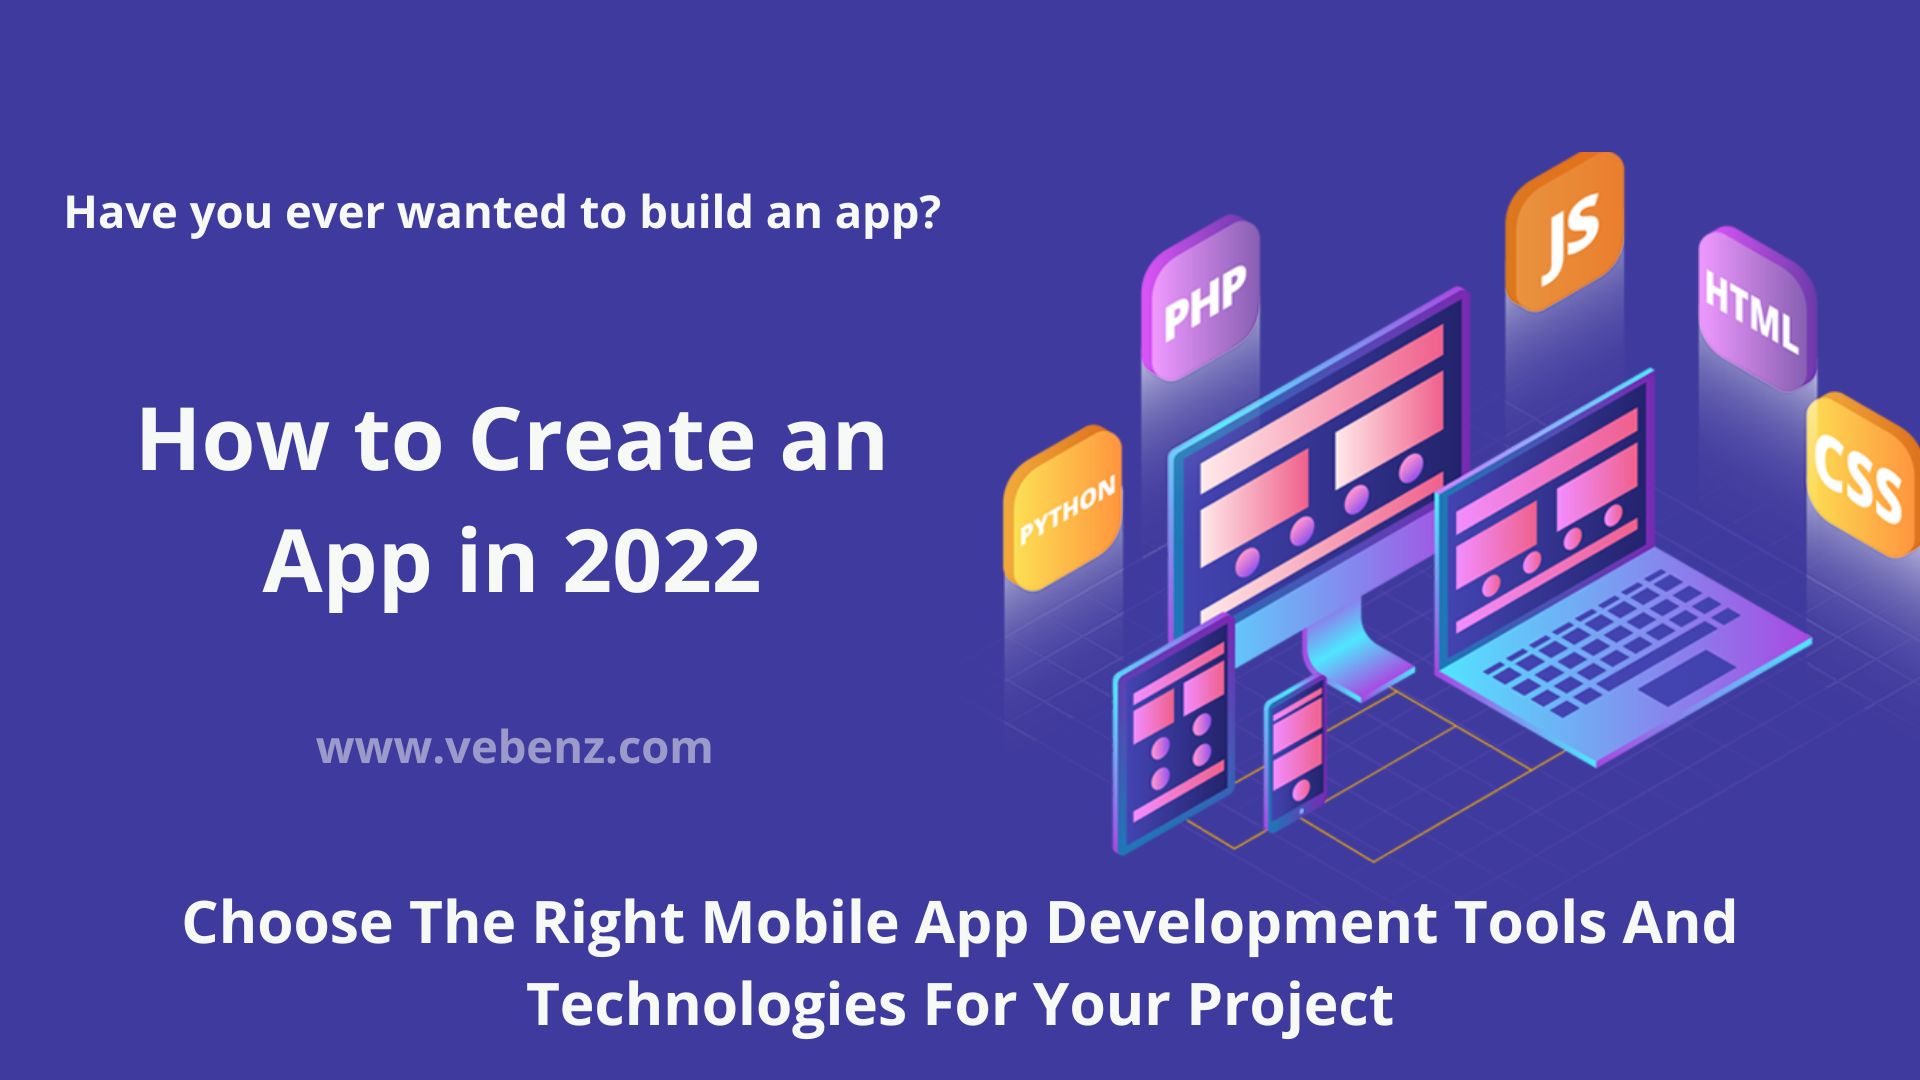 How to Create an App in 2022